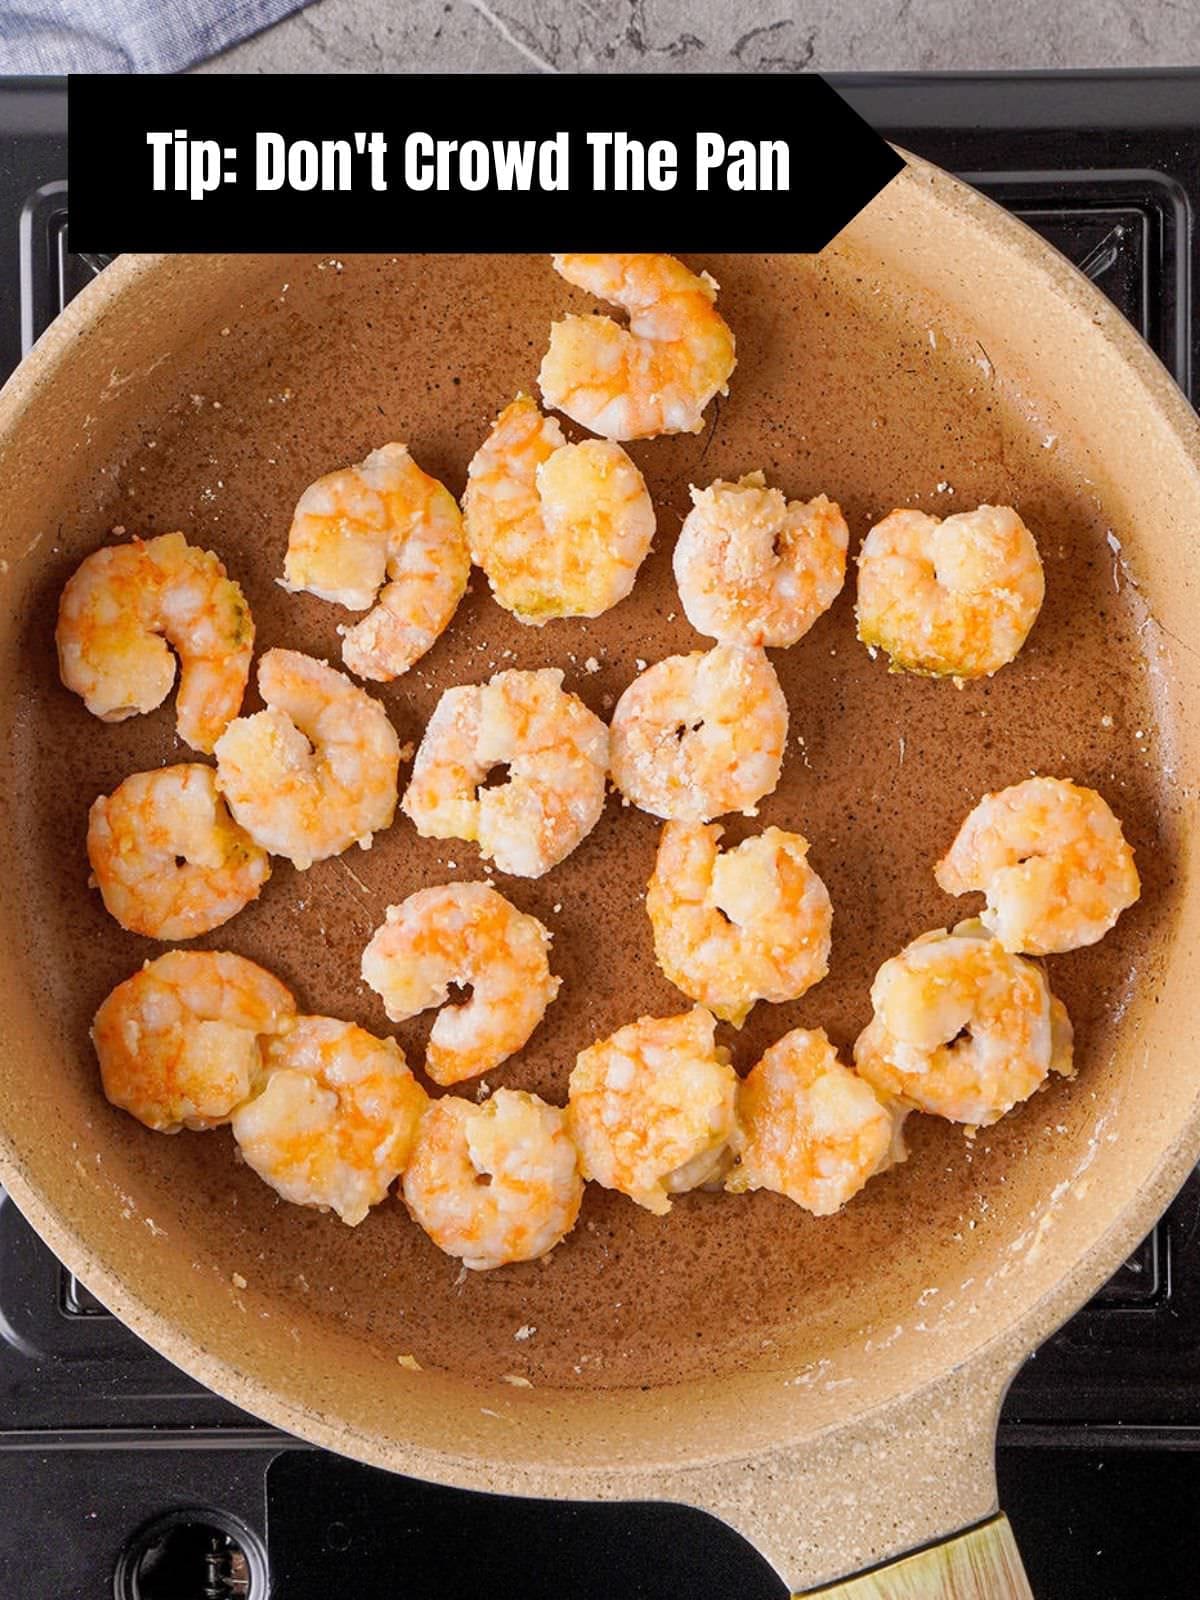 Stir-fried shrimp with text "Tip: Don't Crowd The Pan."